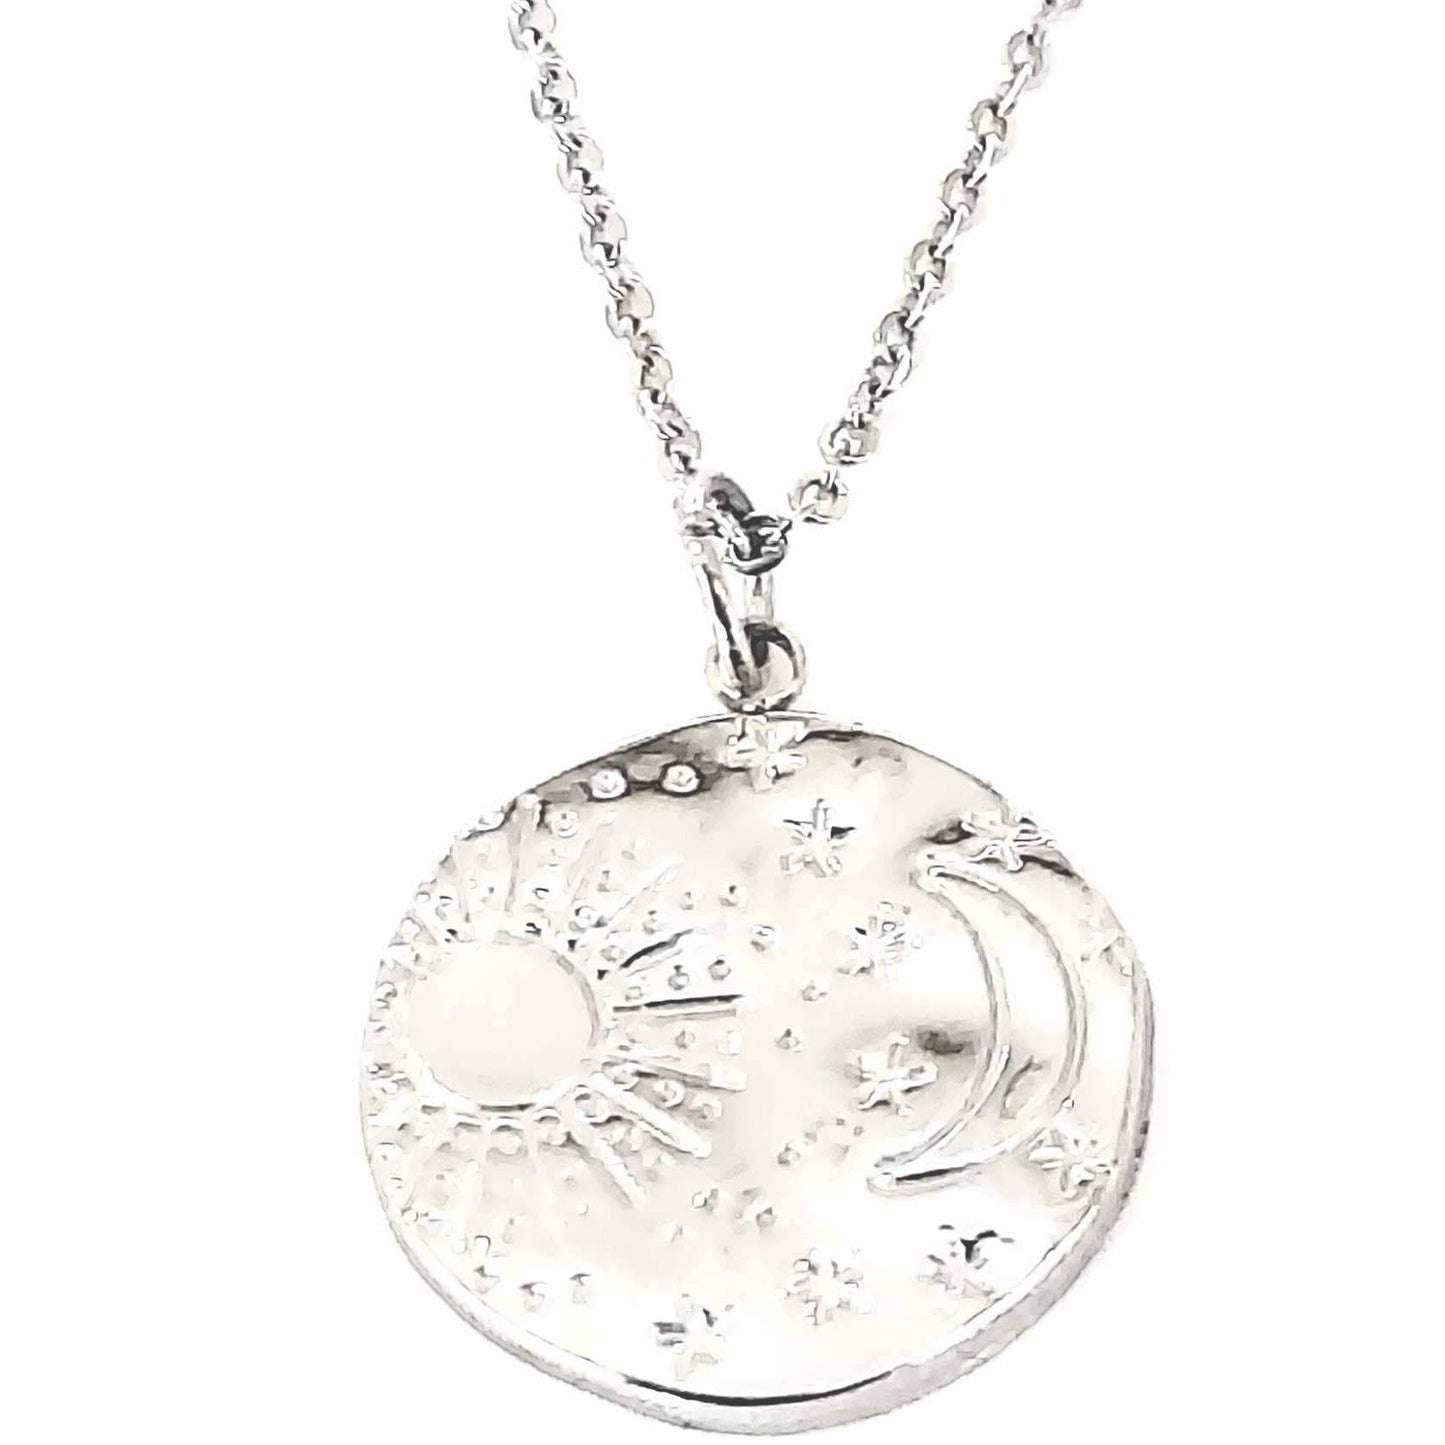 Sun and Stars Uneven Medallion Stainless Steel Necklace | Pretty Silver Pendant on Chain